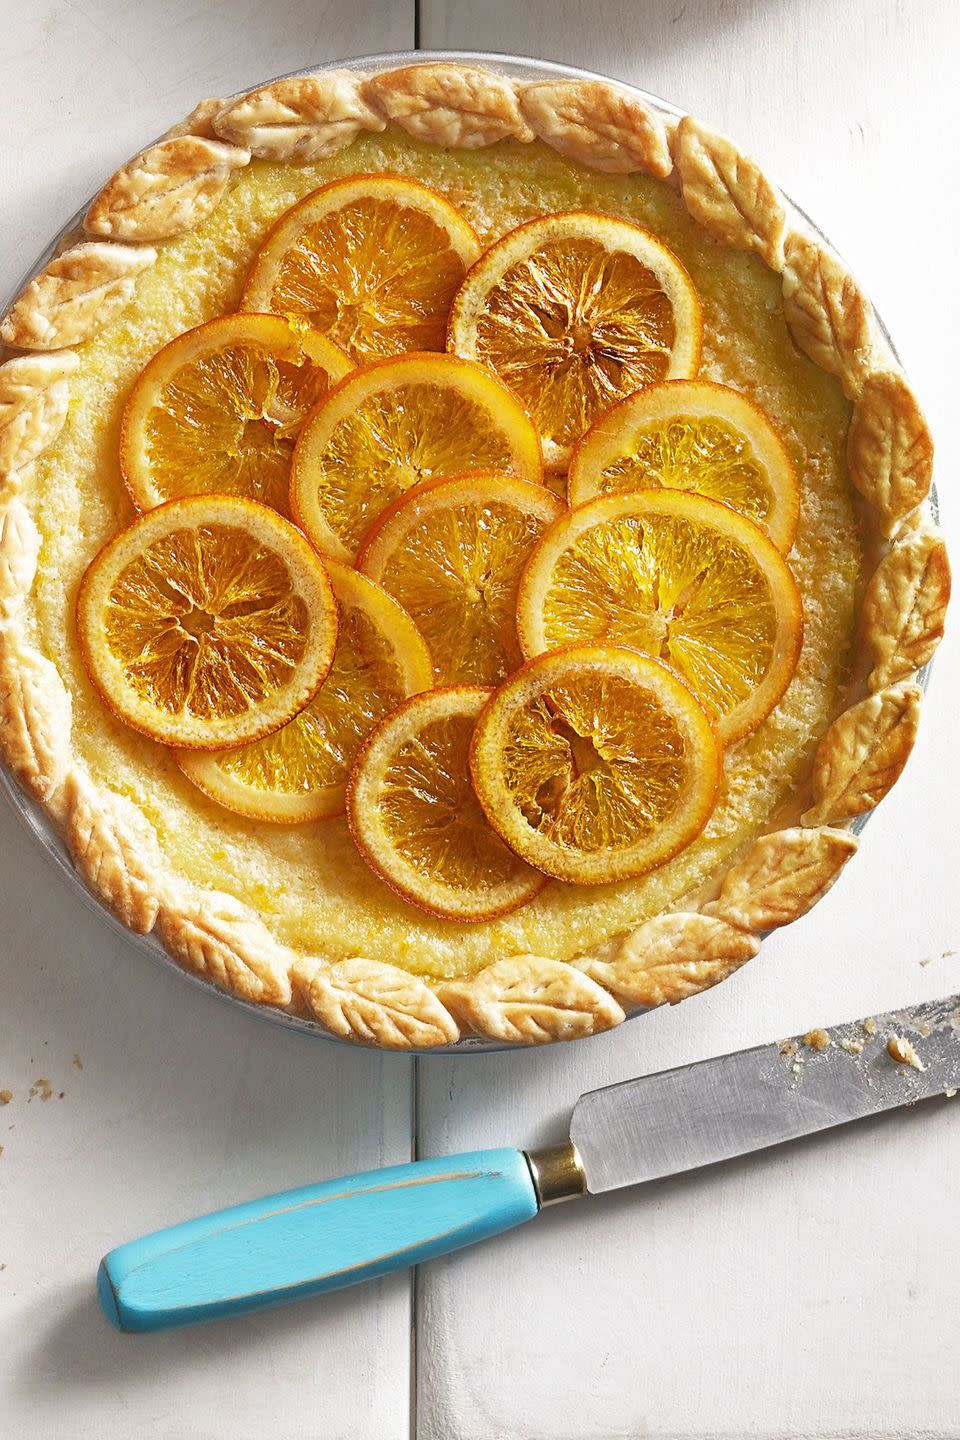 orange buttermilk chess pie with candied orange slices on top and pie crust leaves around the border